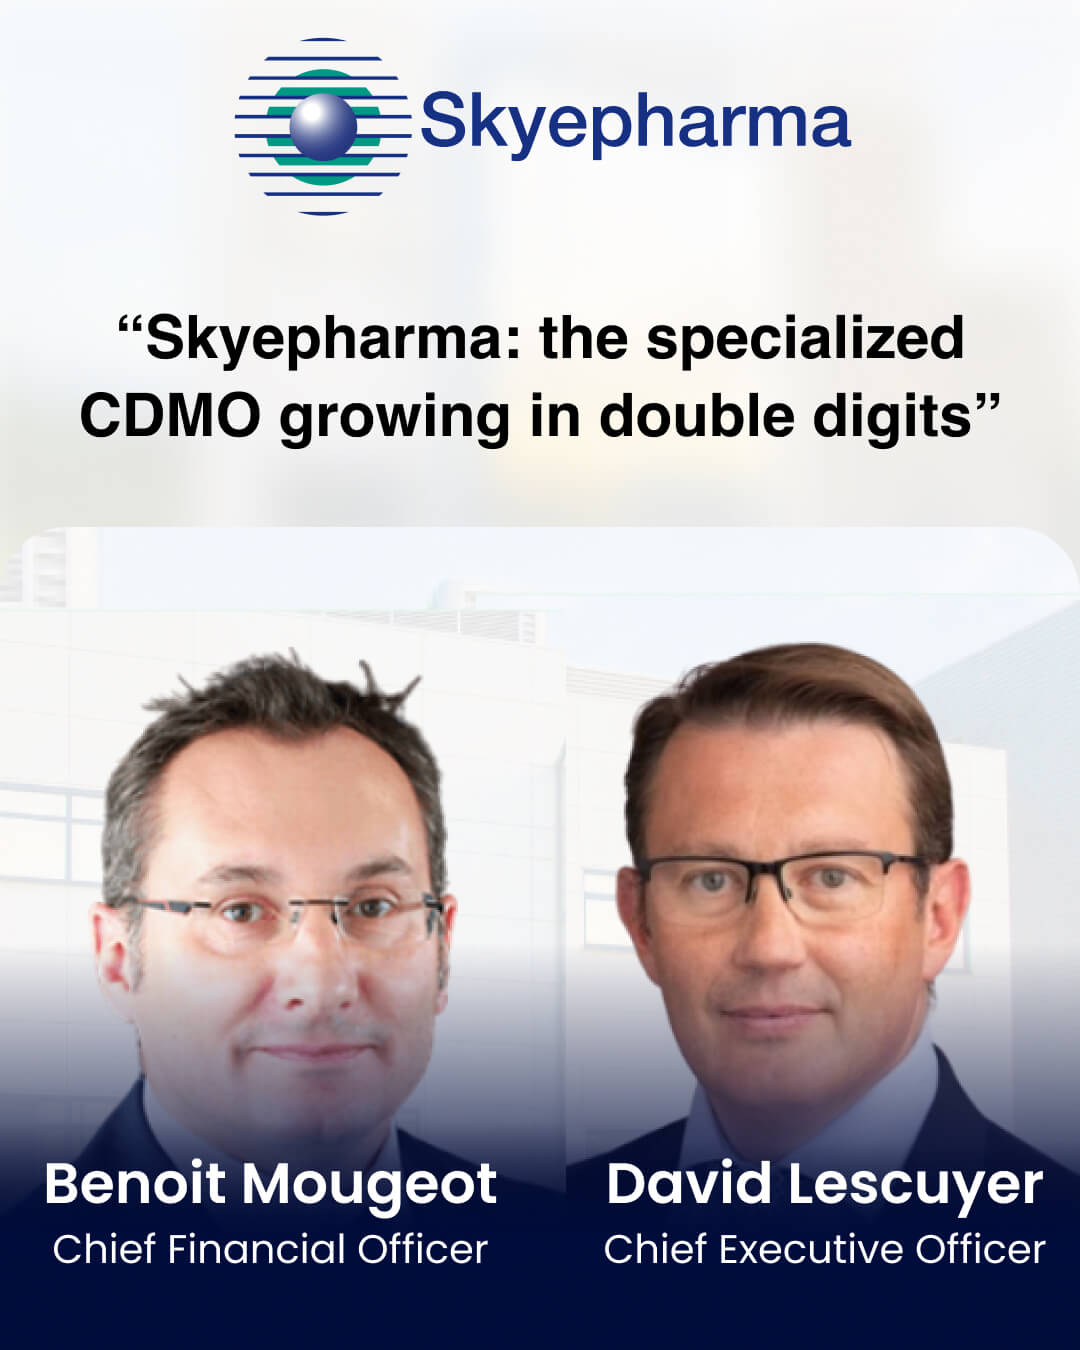 “Skyepharma: the specialized CDMO growing in double digits”